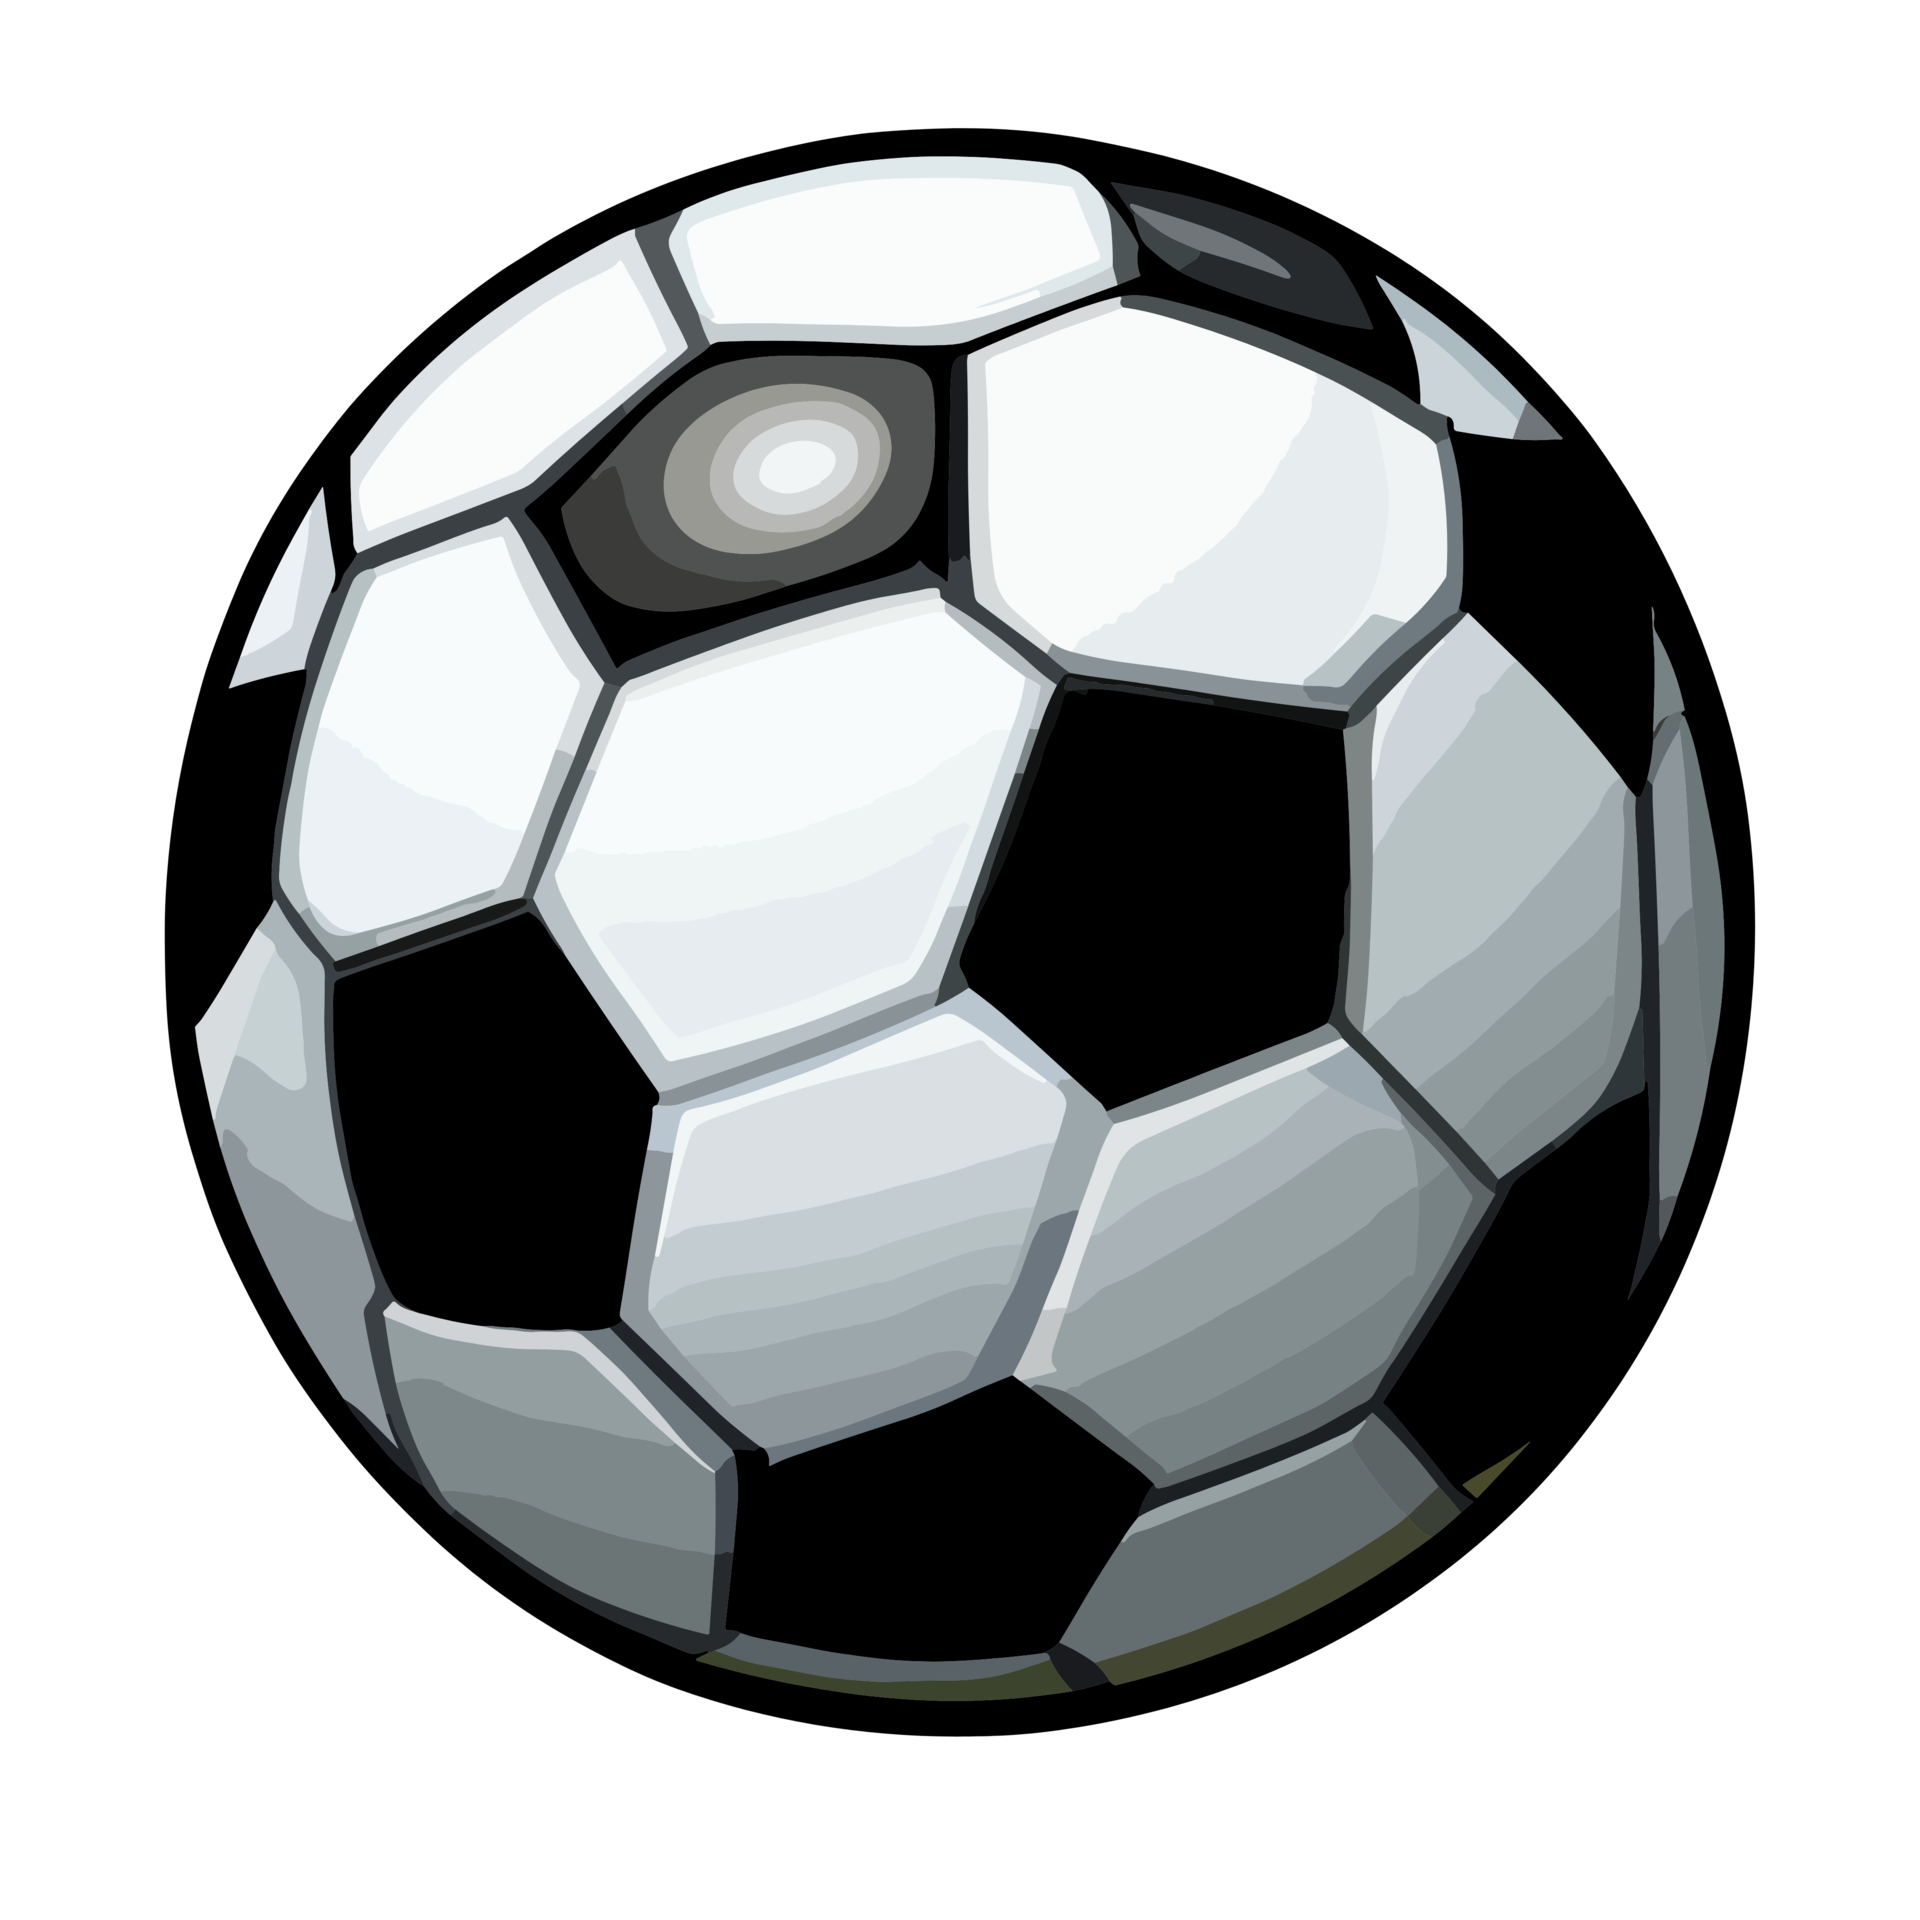 Football Soccer ball Clipart transparent background 24029975 PNG